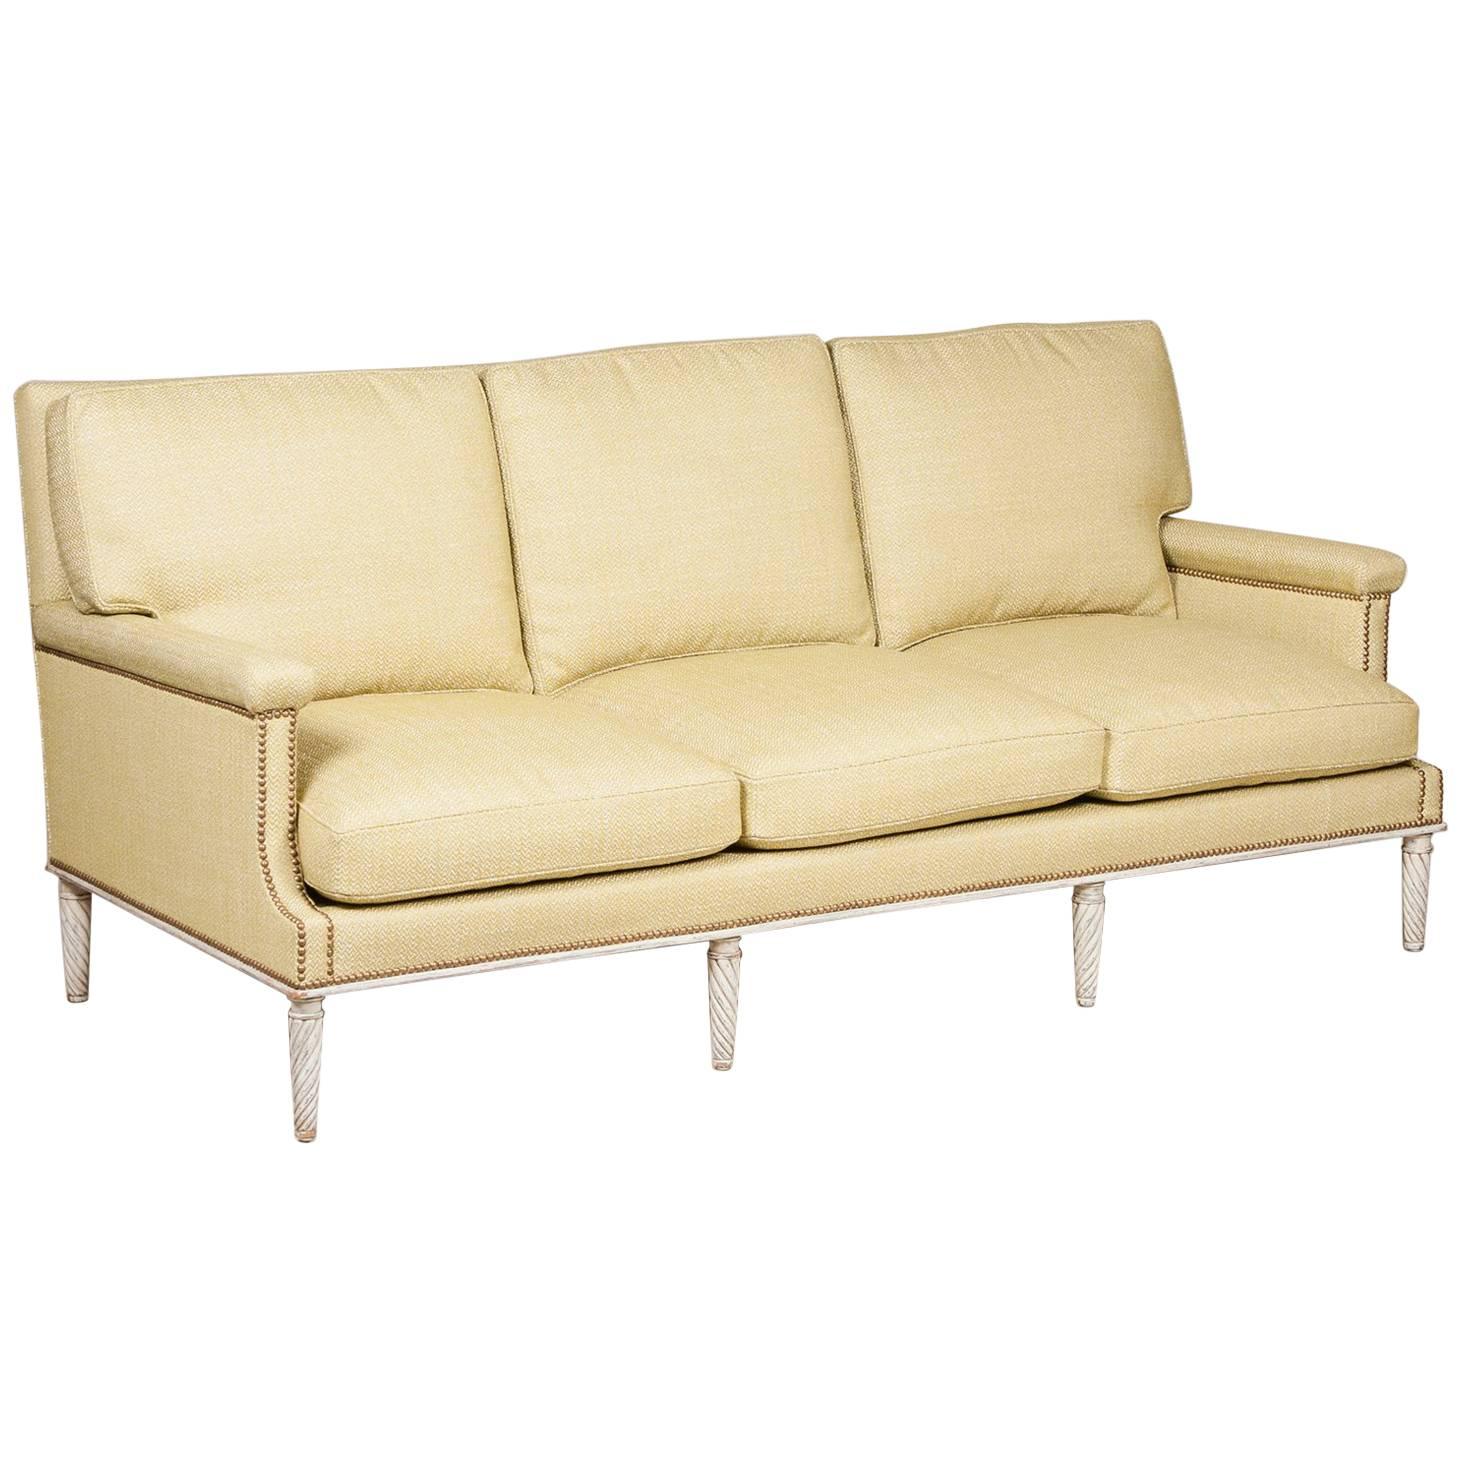 Square-Backed Sofa by Maison Jansen For Sale